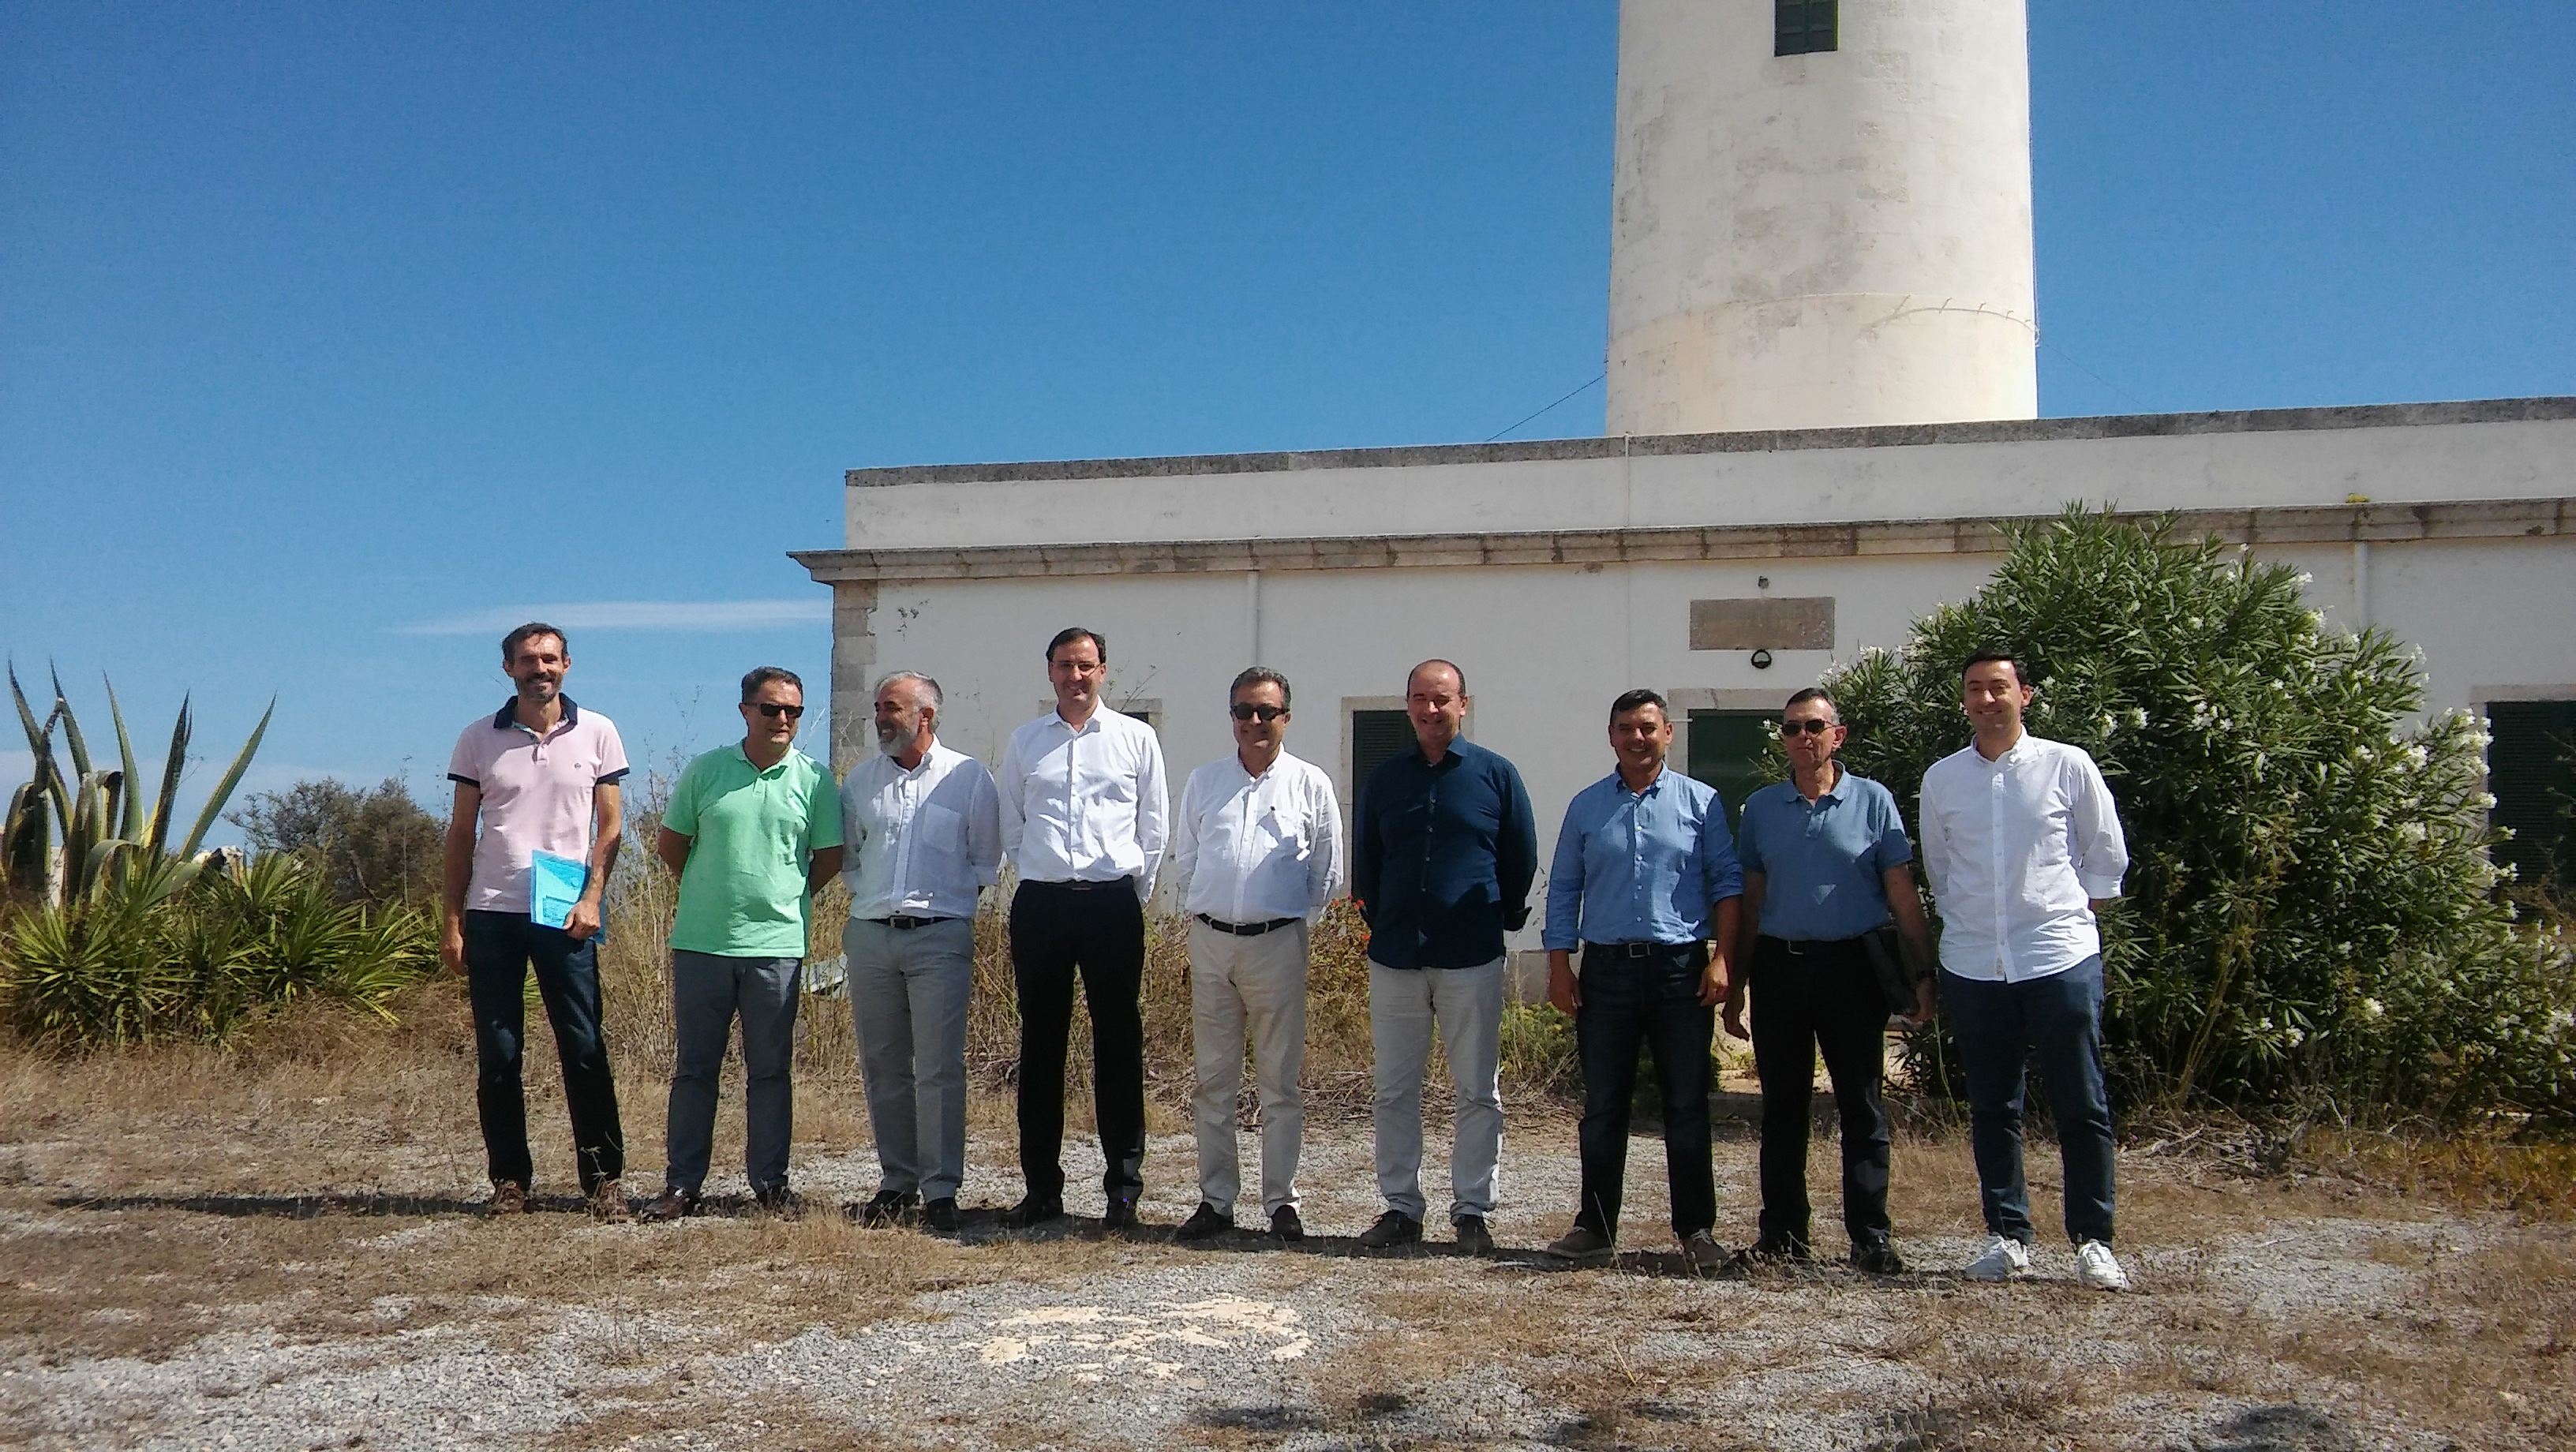 The APB will grant permission to the Island Council of Formentera to organise cultural and museum activities at the La Mola Lighthouse